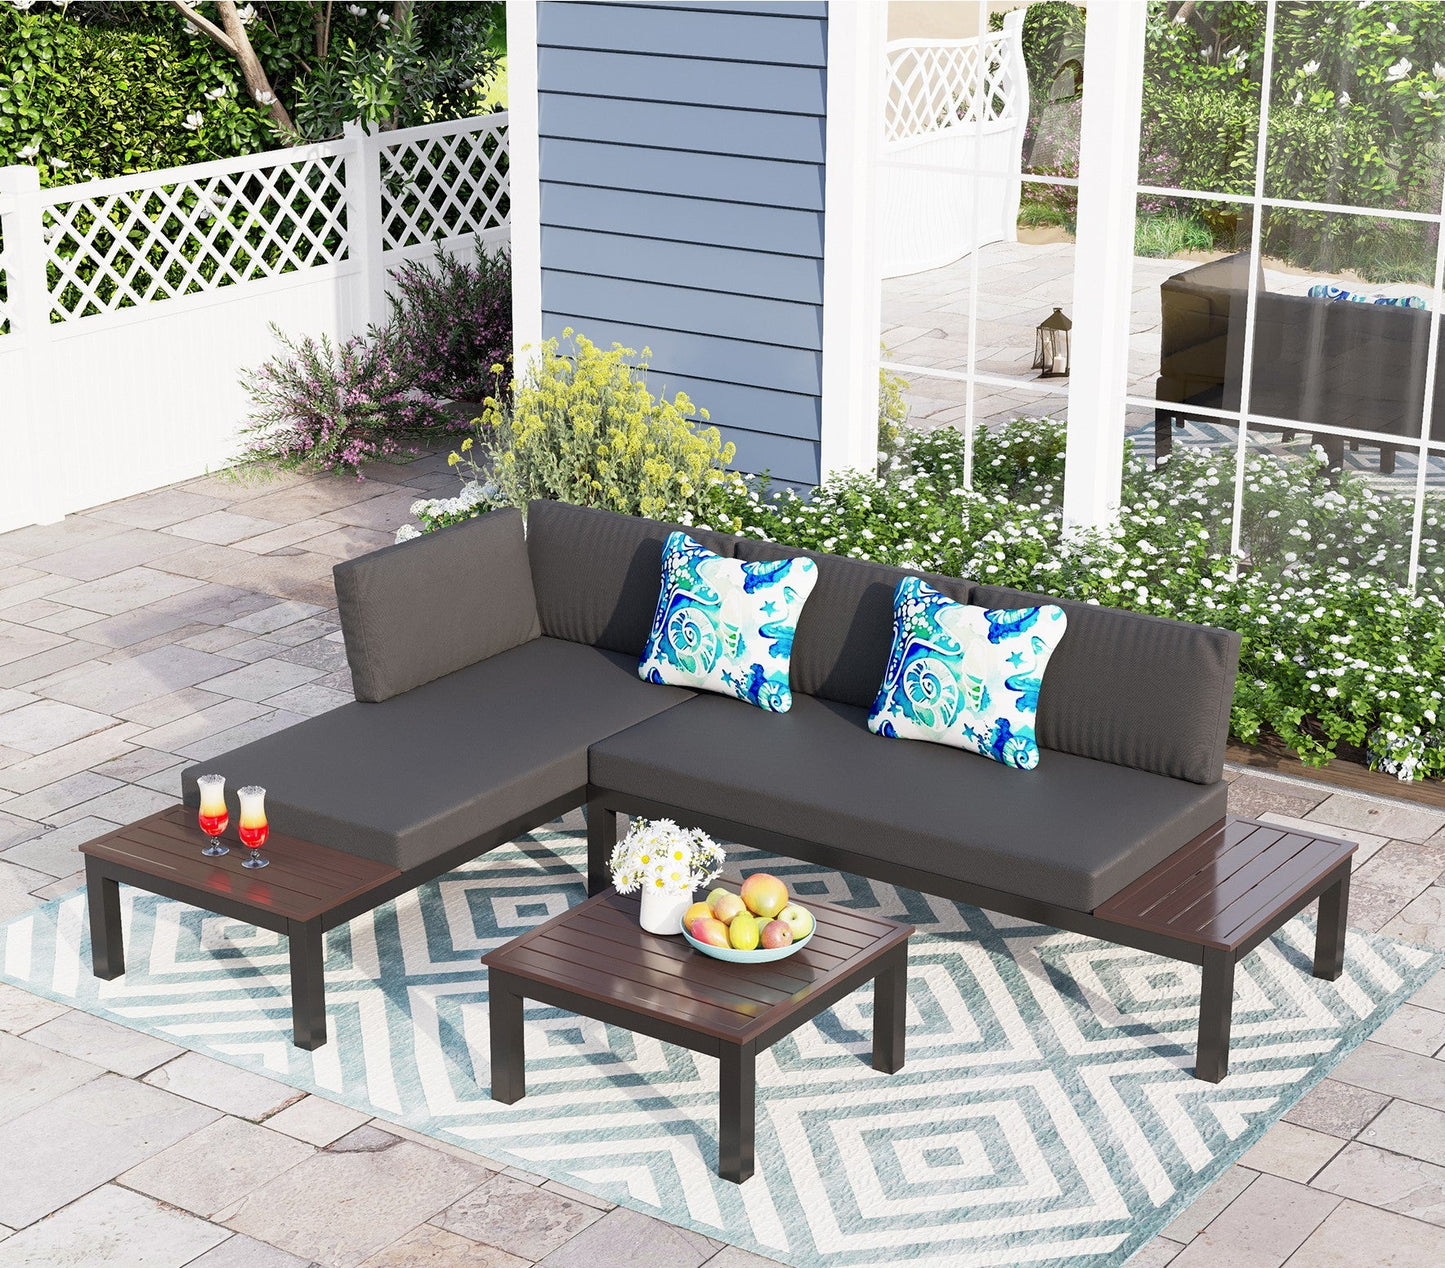 Sophia & William Patio Sectional Sofa Set Outdoor 4-seat Conversation Furniture with Table, Cushions